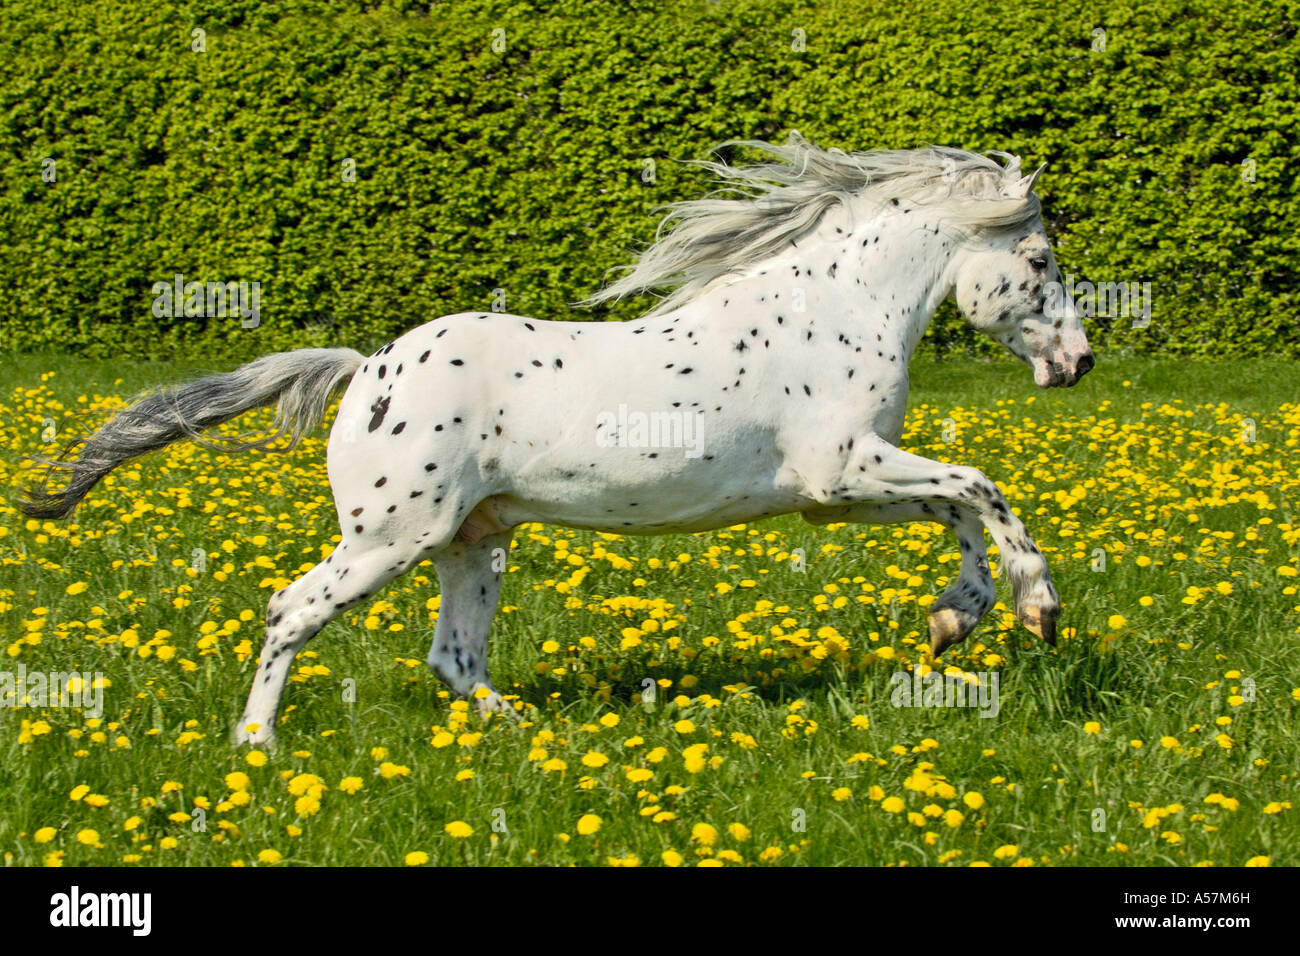 5 years old Knabstrupper horse stallion galloping in a meadow full of dandelion Stock Photo